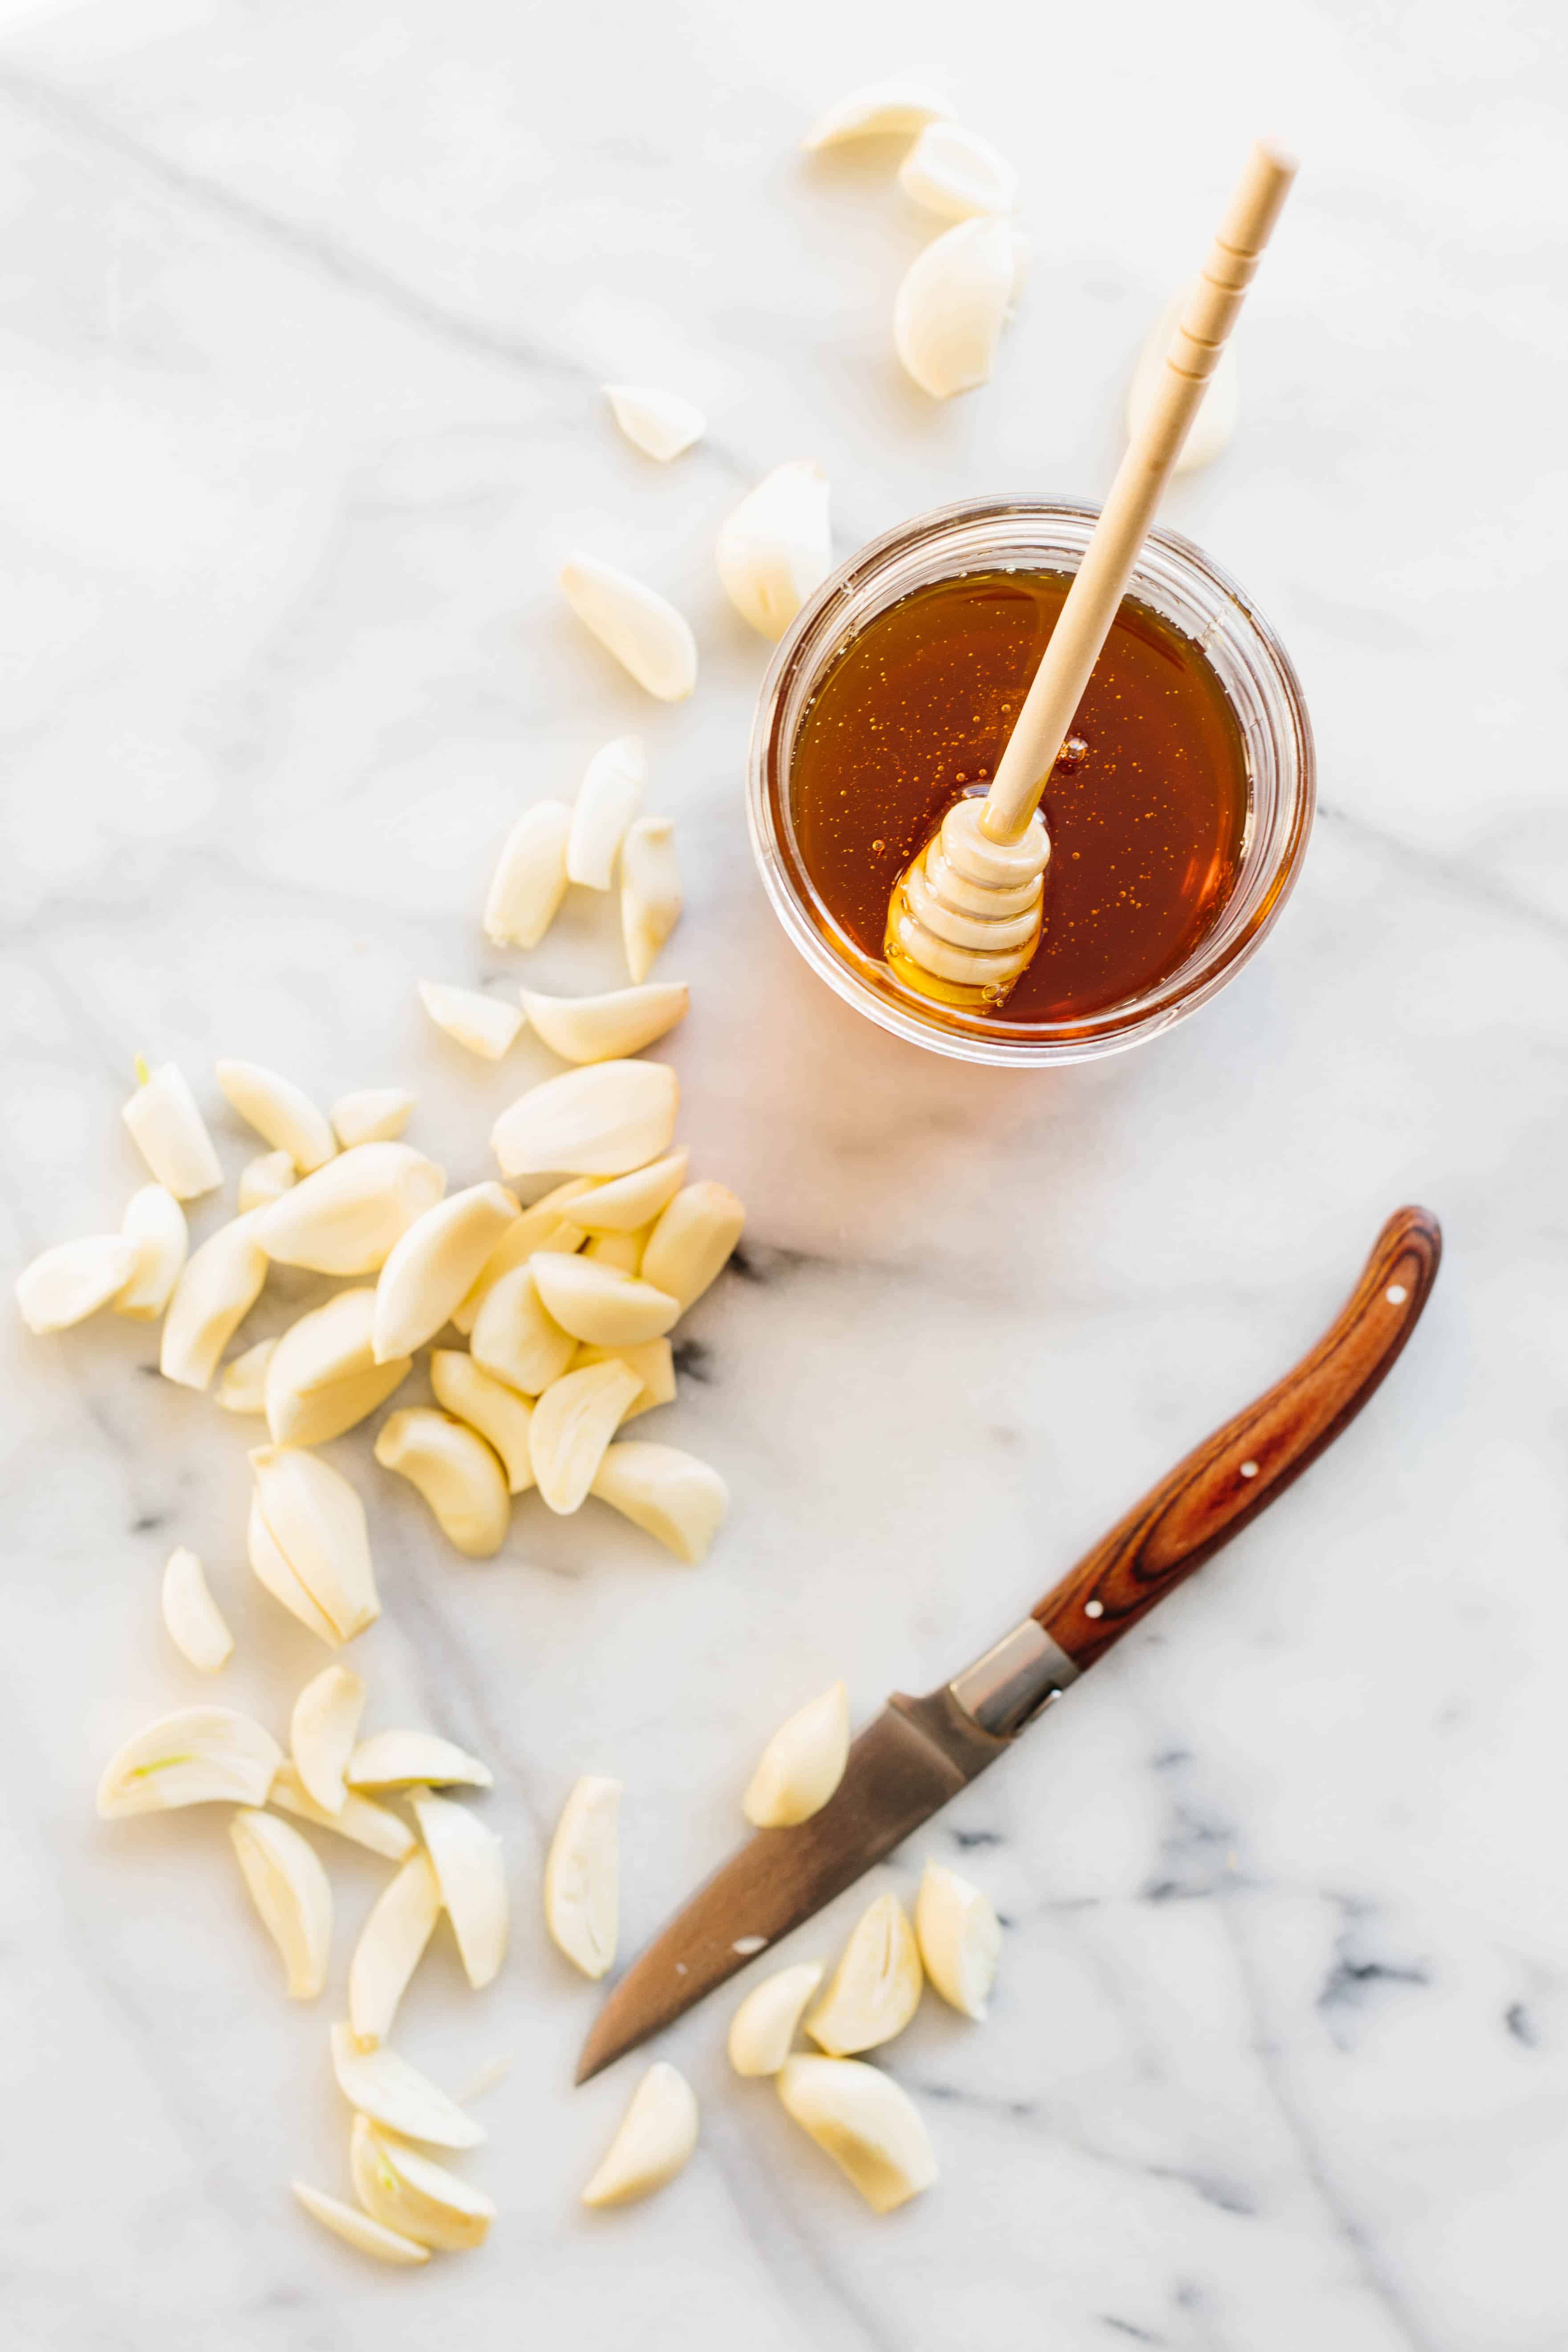 A jar of honey, a knife, and many peeled garlic cloves on a marble counter.